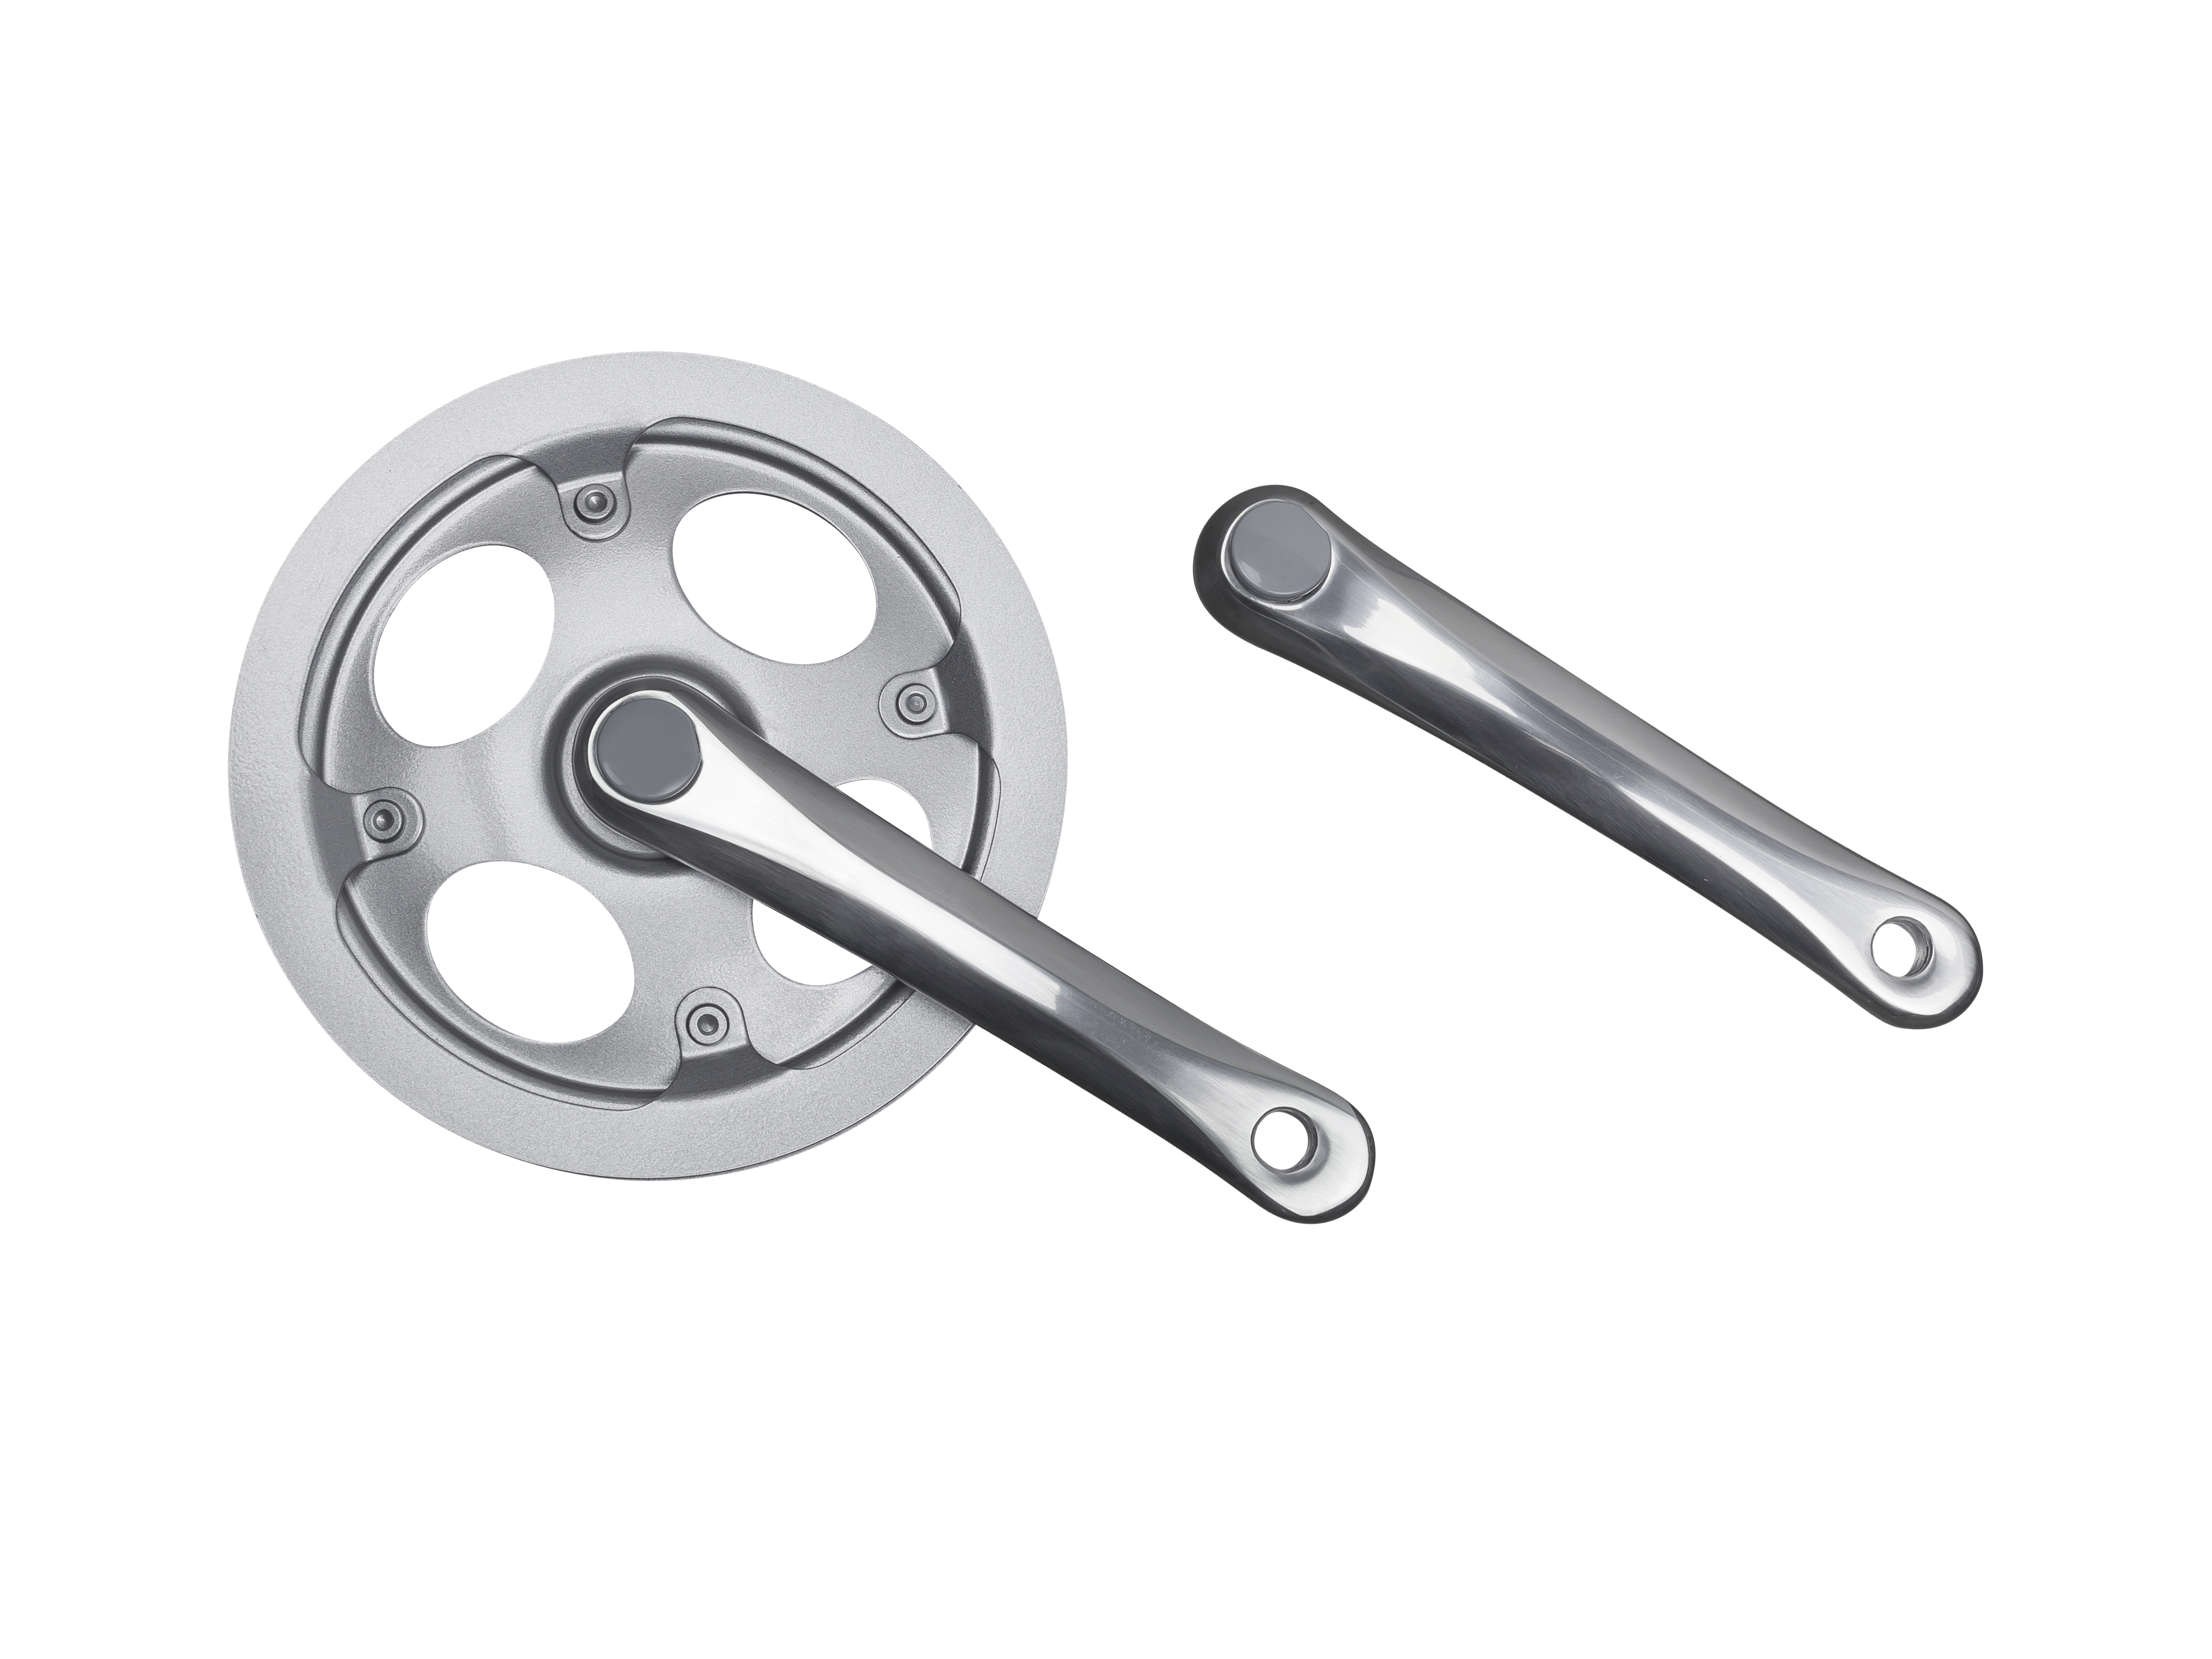 Crank Electra Townie w/Dual Guide 170mm Silver